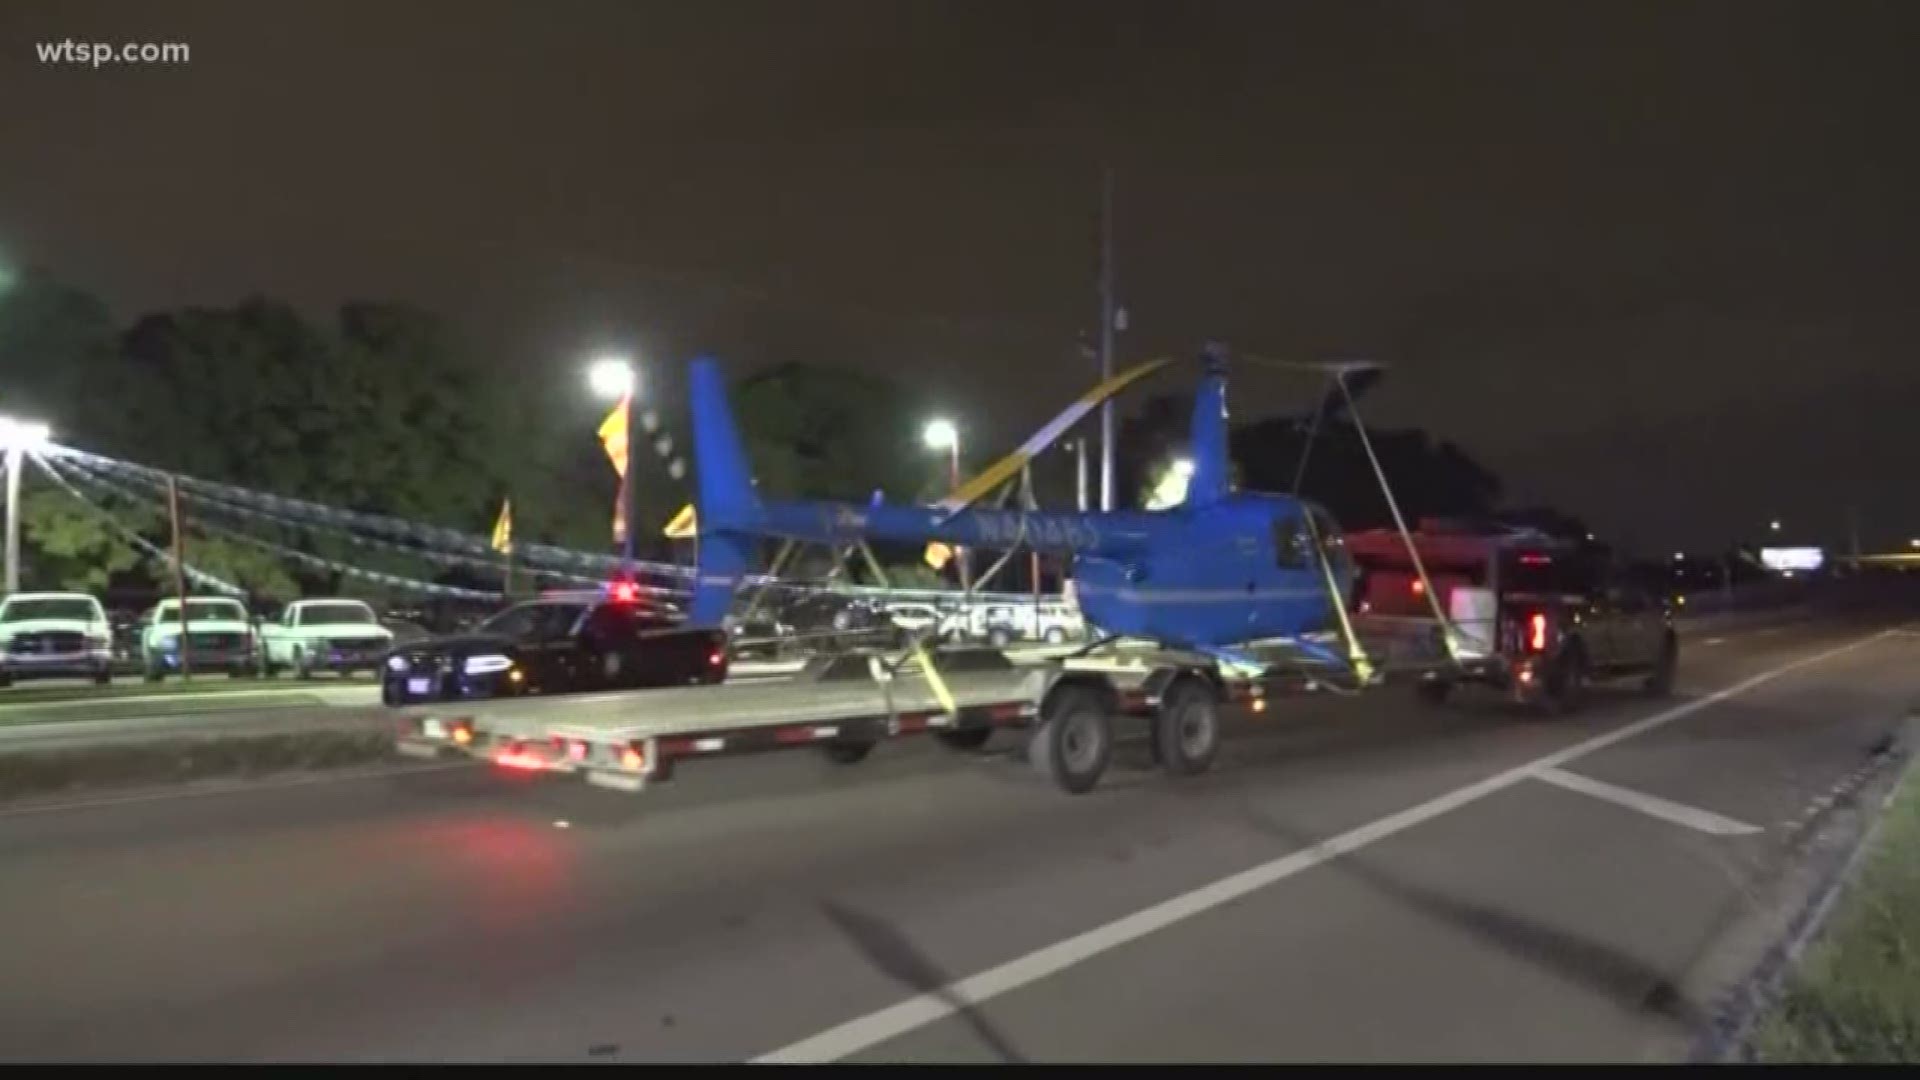 A shattered rotor blade flew into a truck, killing a passenger inside.